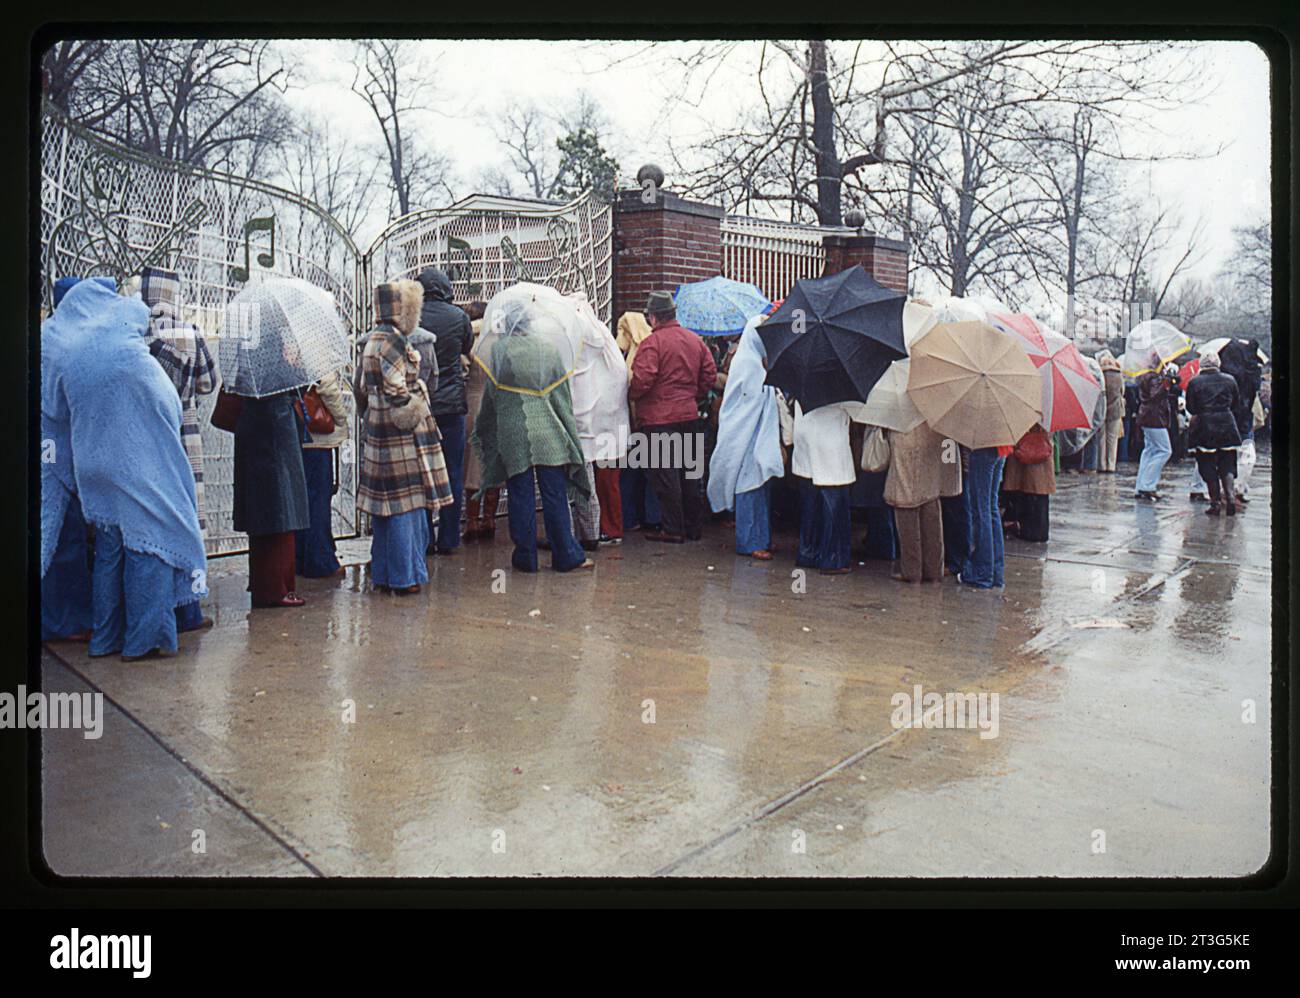 On Jan 8, 1978 a crowd of mostly women wait in the rain to enter Graceland. It was Elvis' first birthday after his death. Stock Photo